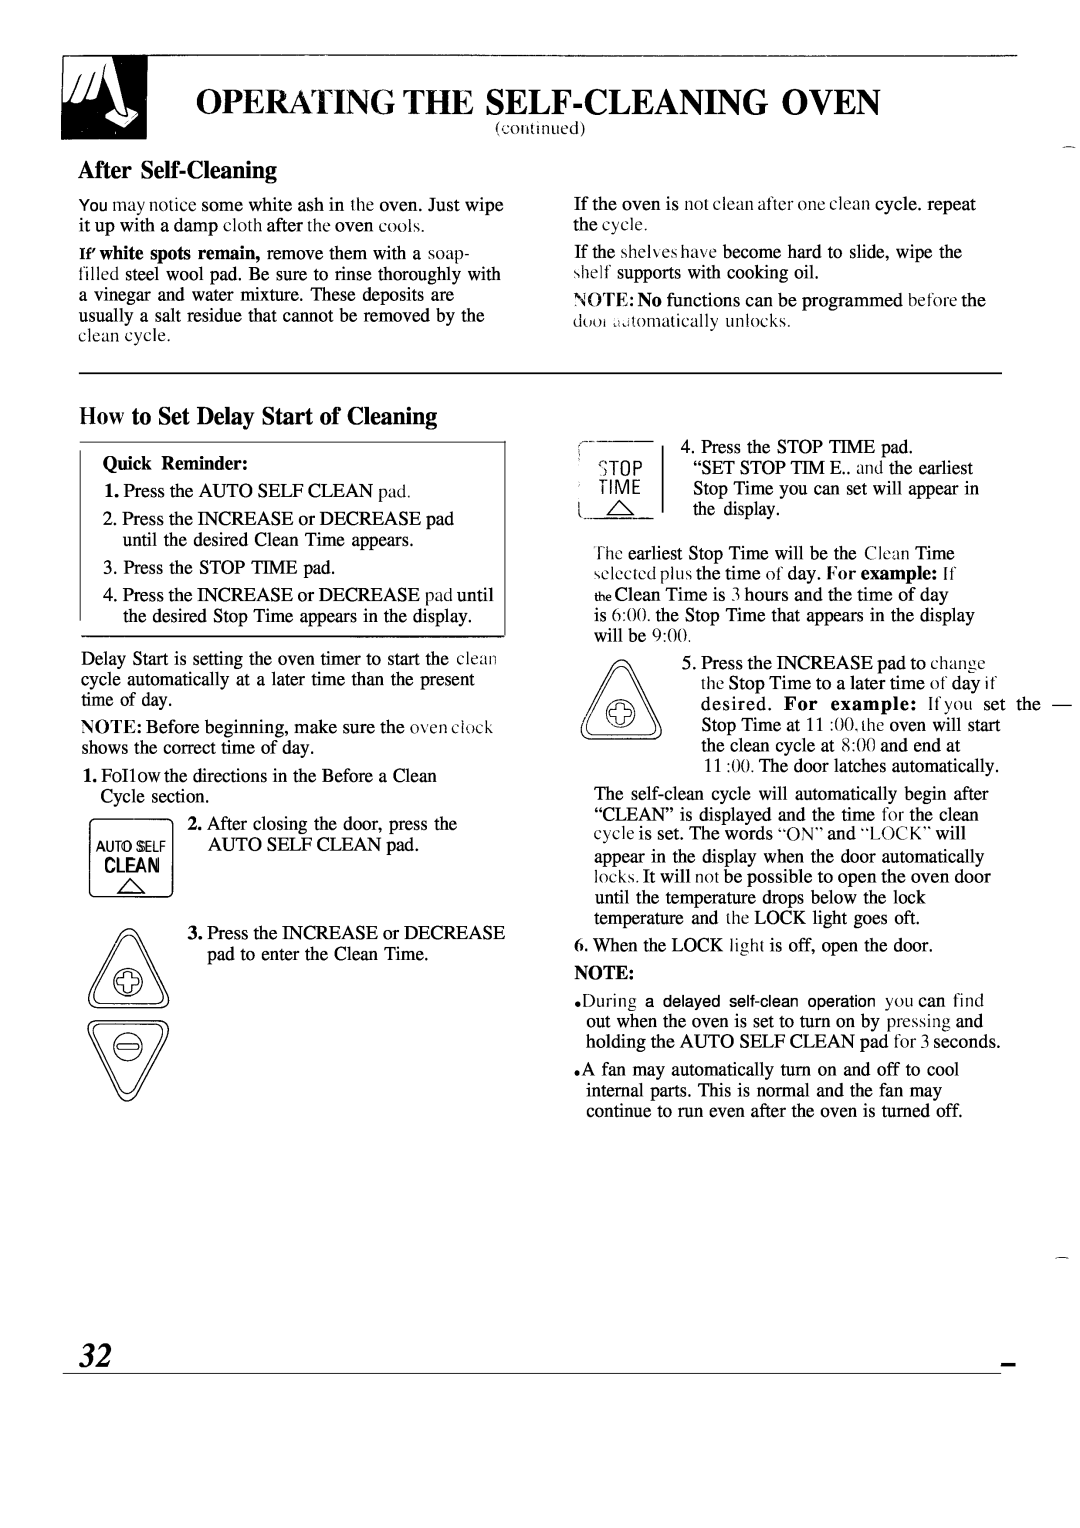 GE 164D2966P126 OPEW’l”ING THE SELF-CLEANING OVEN, After Self-Cleaning, How to Set Delay Start of Cleaning, Quick Reminder 